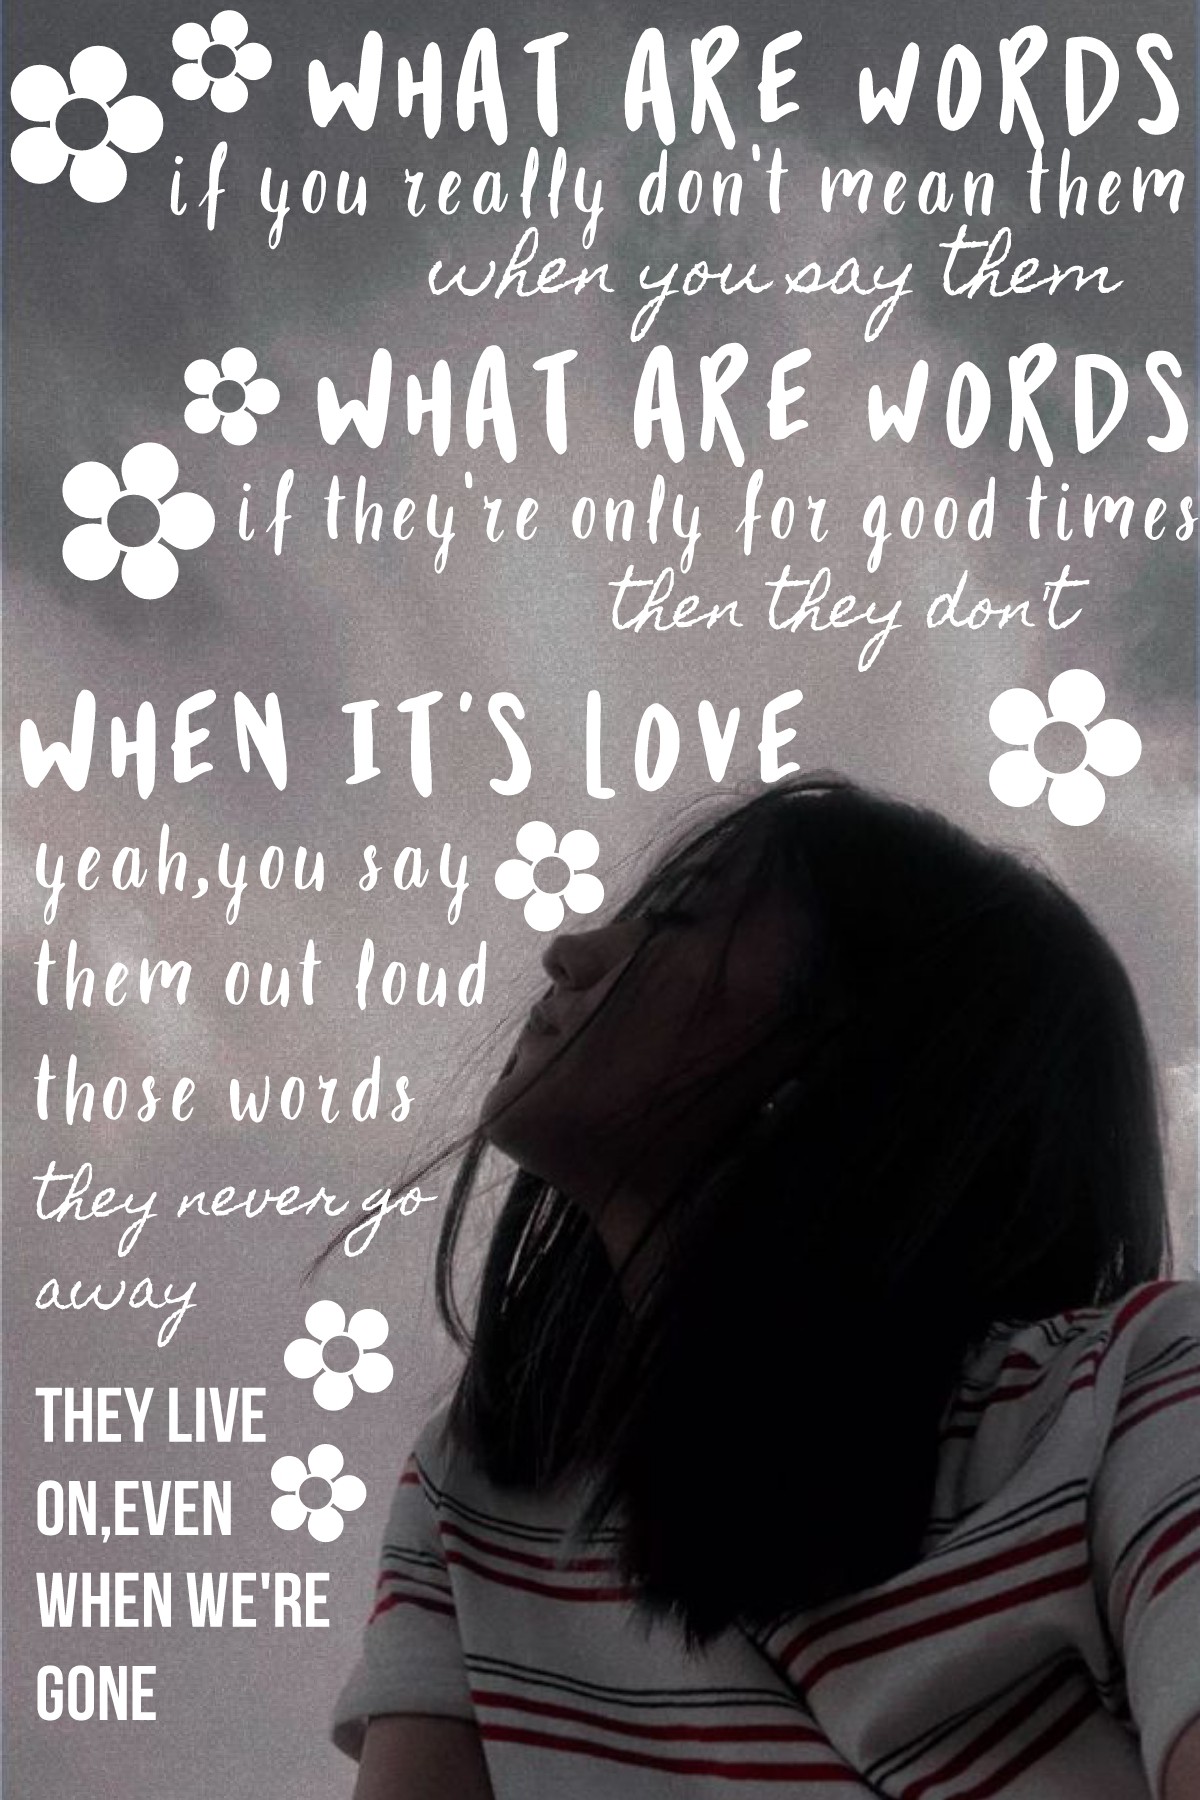 🌼tap🌼
so recently I've heard of this song called "What are words" by Chris Medina and it really resonates with me,and I just hope that these lyrics will be a reminder to be mindful of what we say,and that actions speak louder than words 💖
